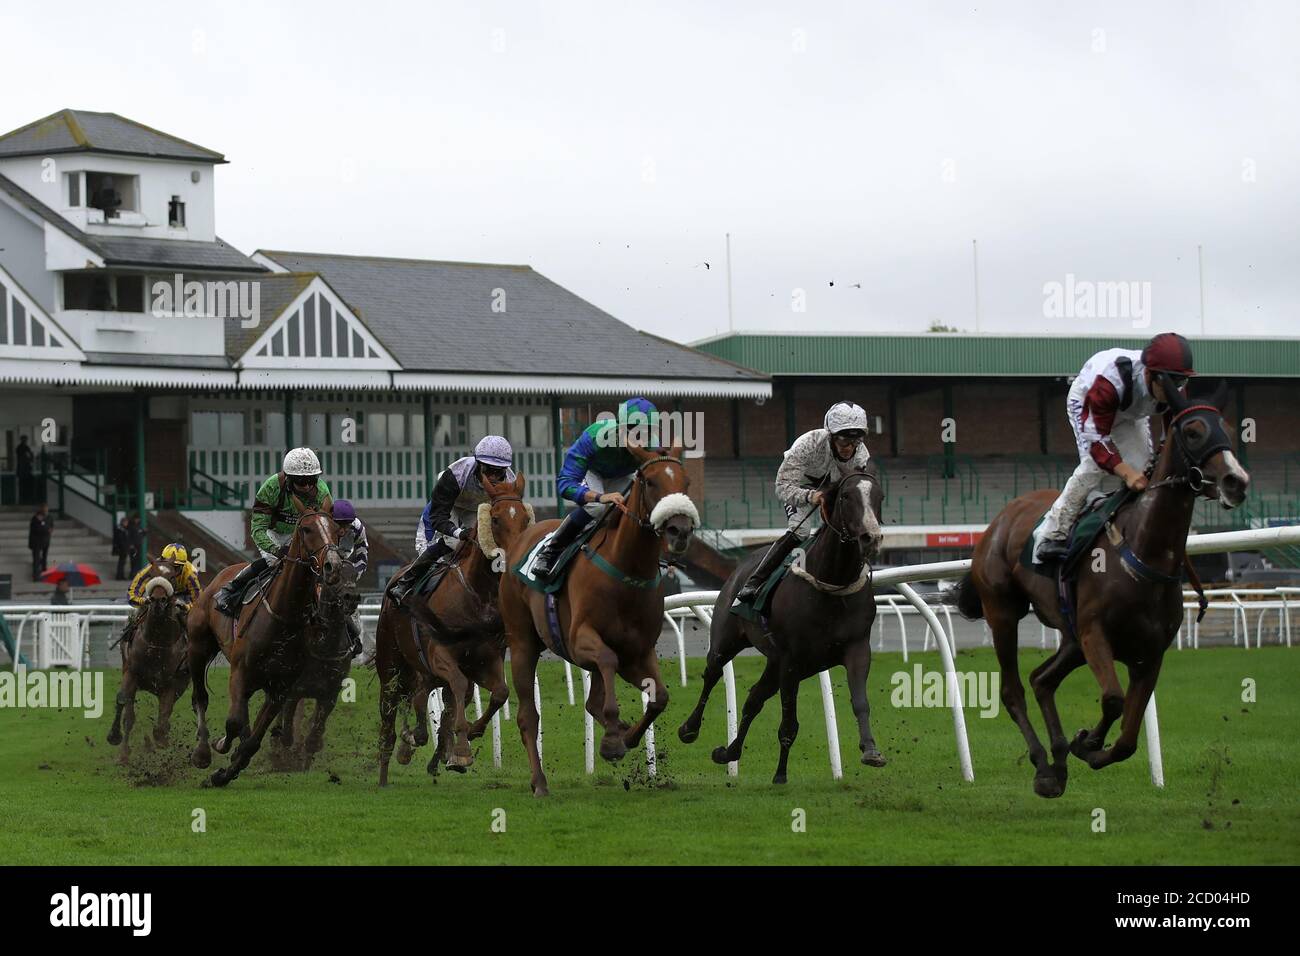 A general view of the runners and riders during the Crow Plump Handicap at Catterick Bridge Racecourse. Stock Photo